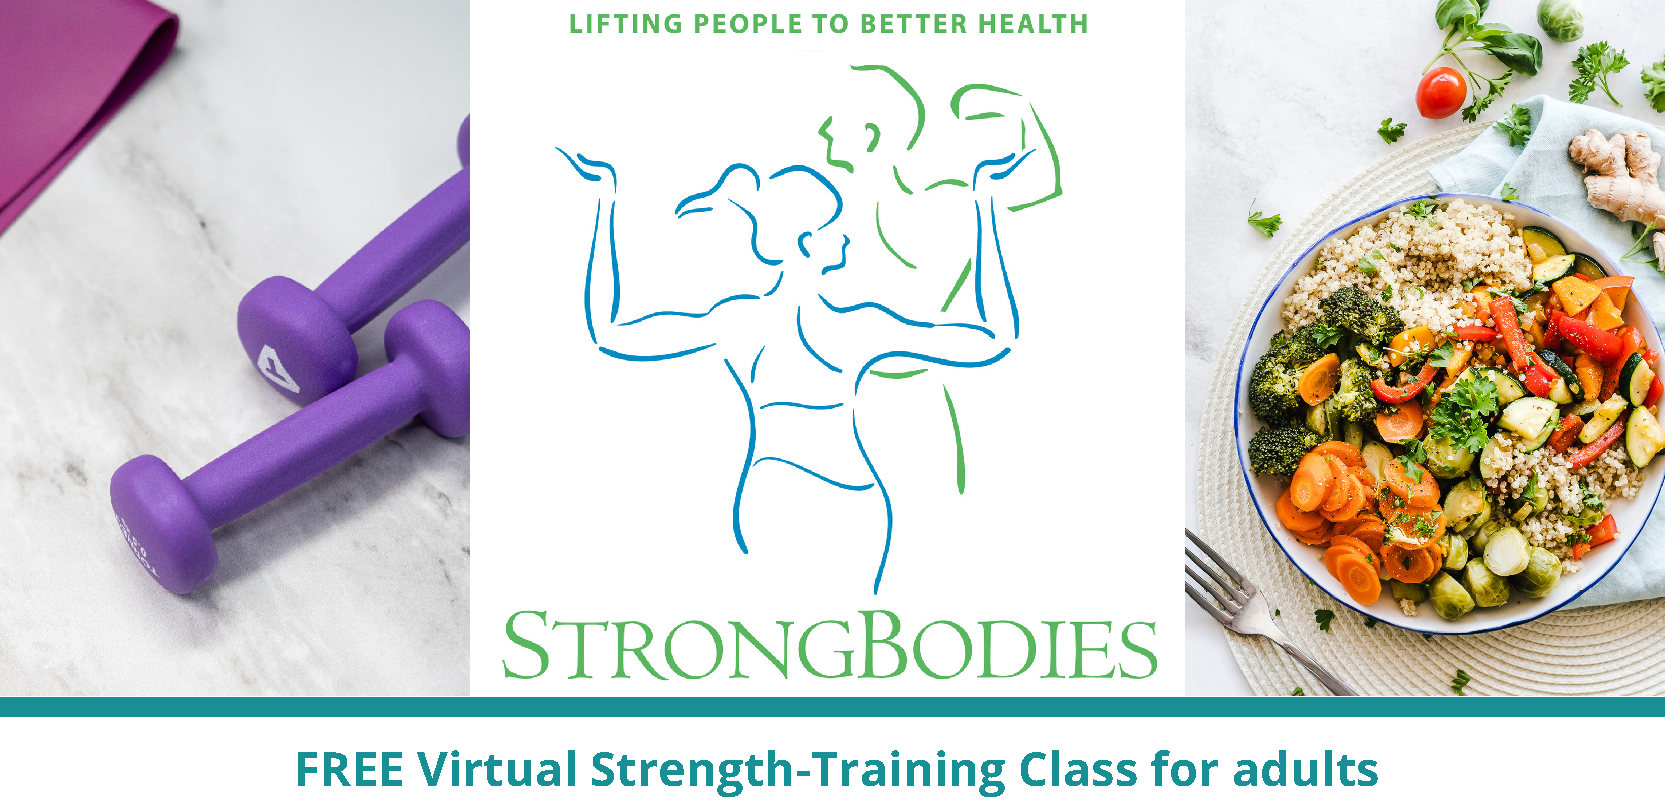 Strong Bodies Logo